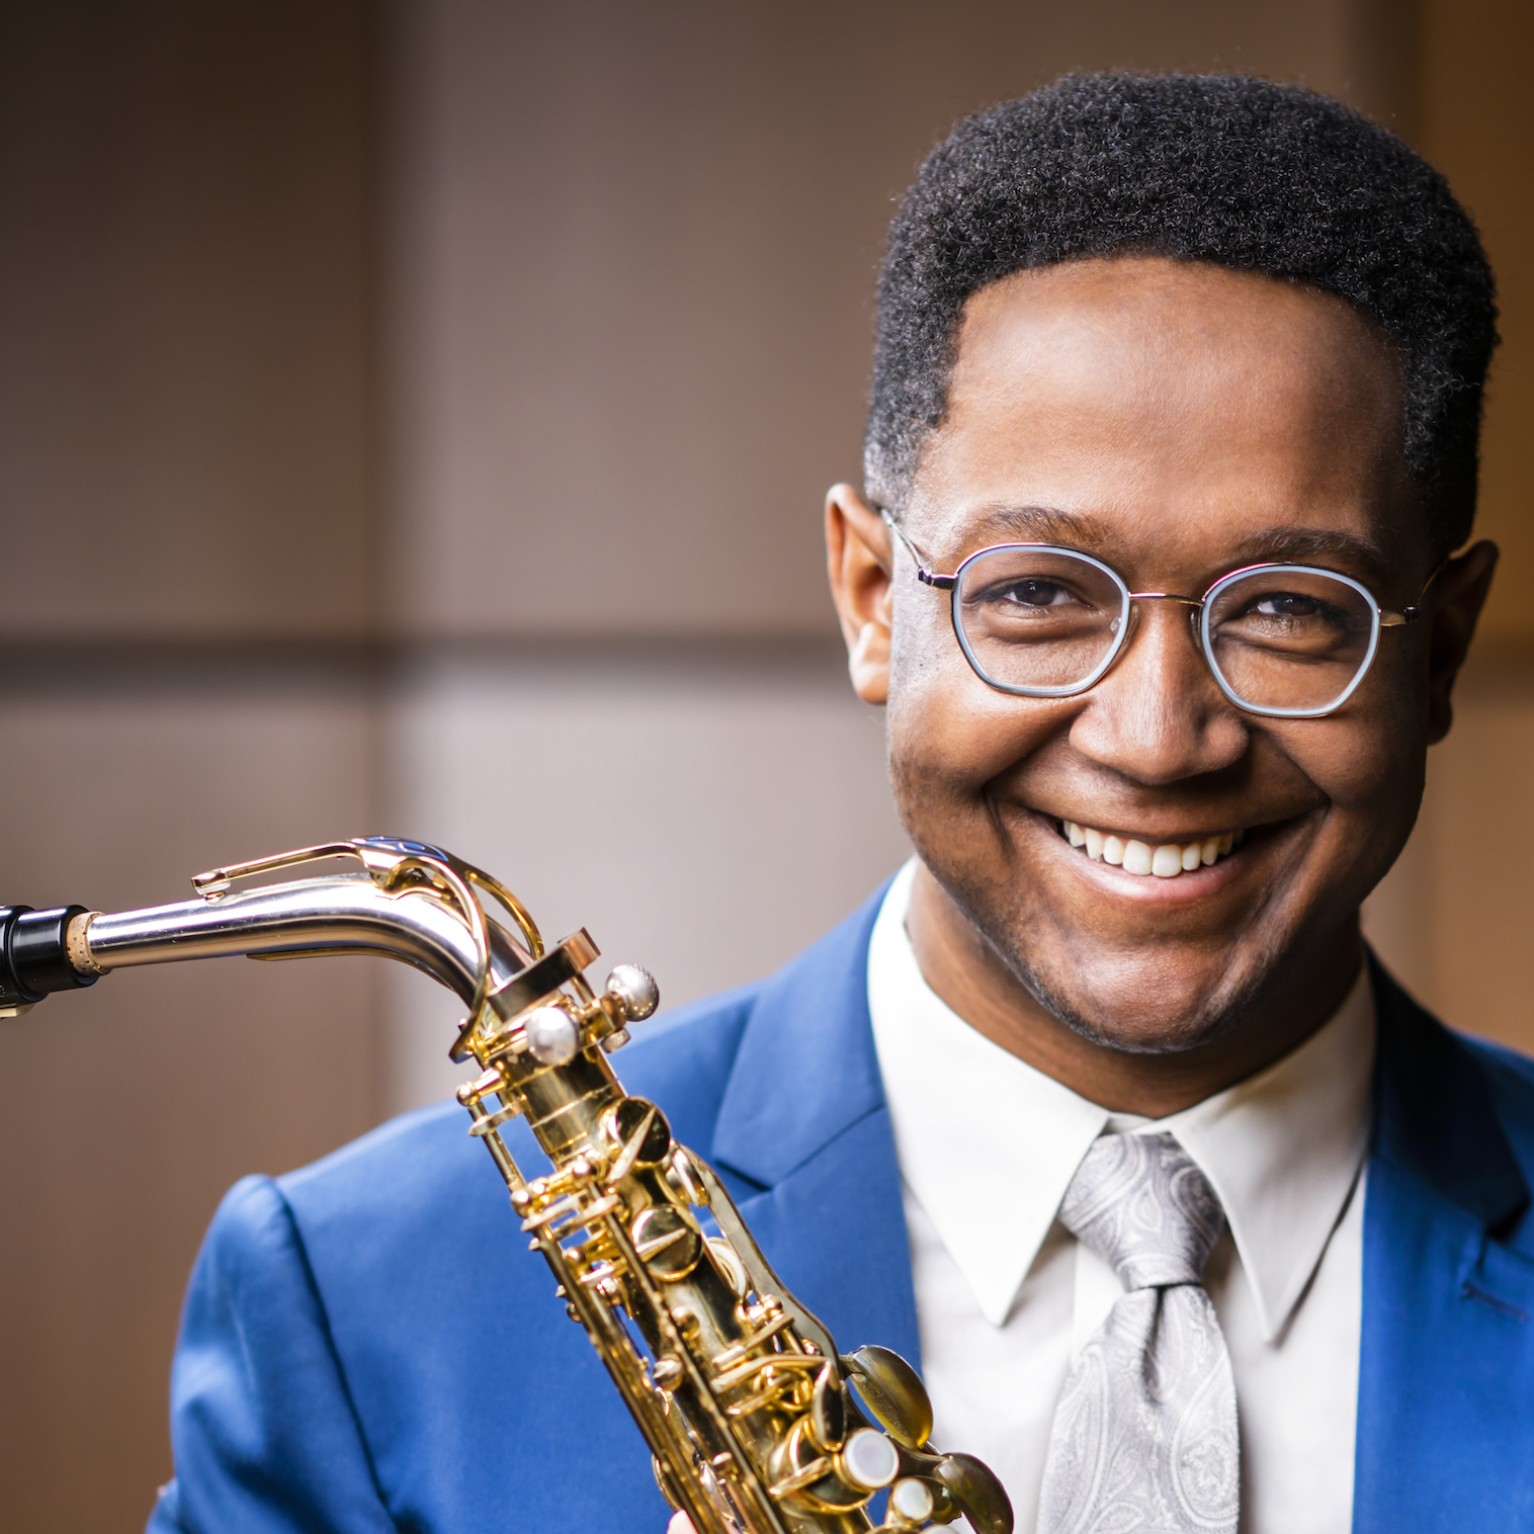 Saxophonist Steven Banks holds his instrument; he wears a bright blue blazer and white collared shirt with tie.